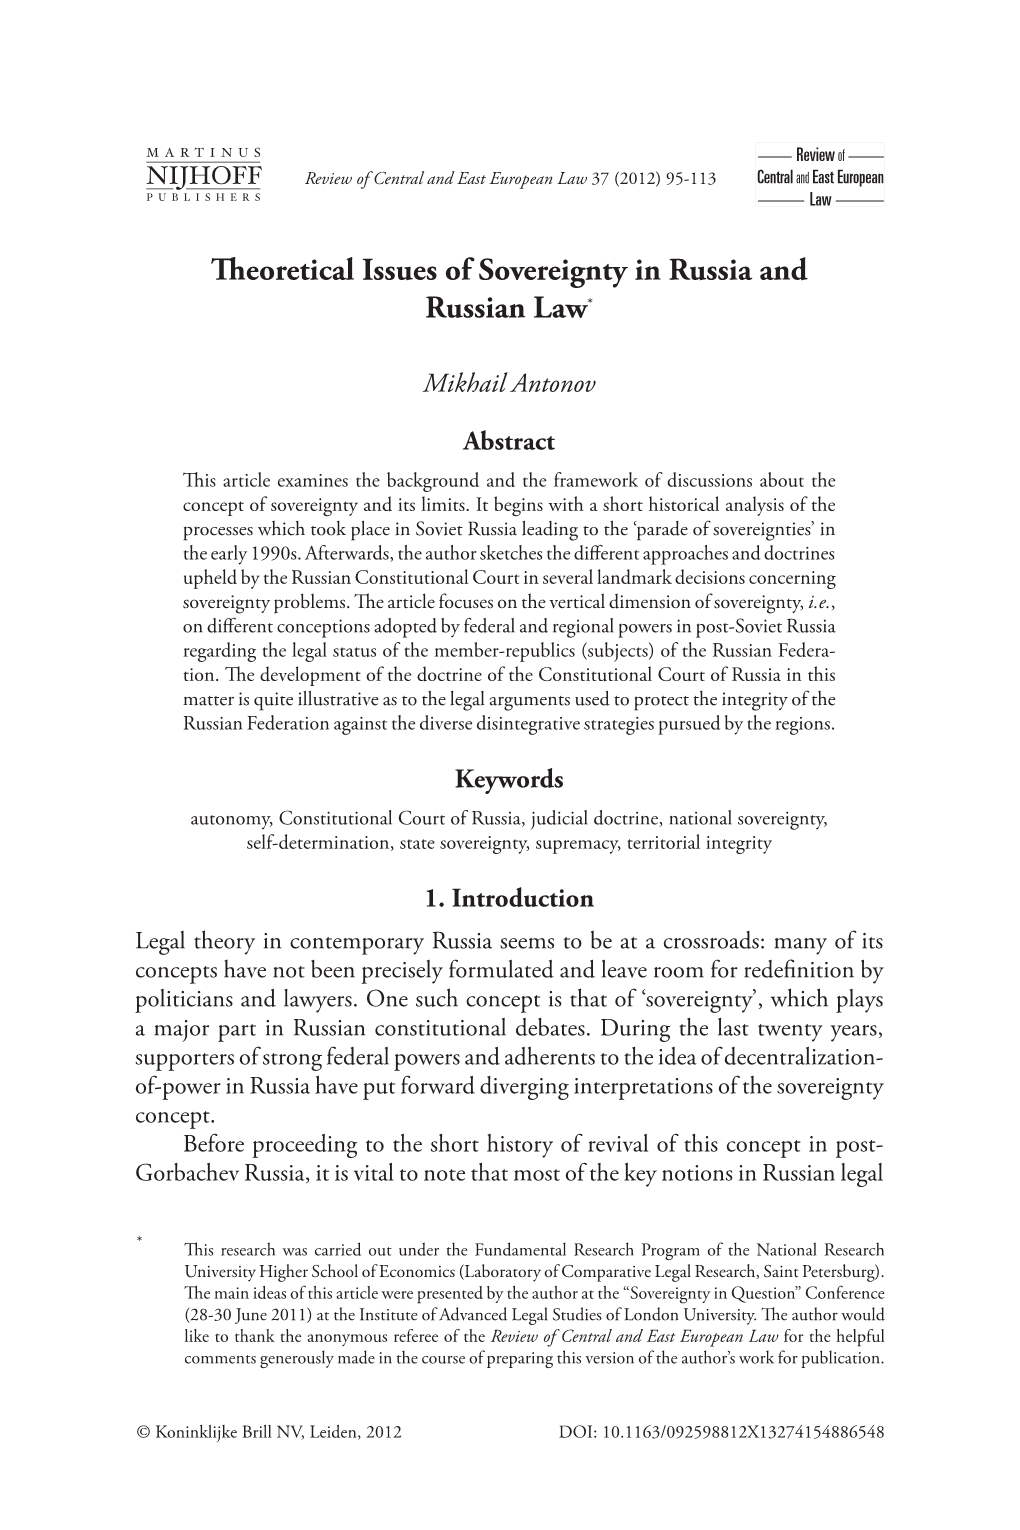 Theoretical Issues of Sovereignty in Russia and Russian Law*